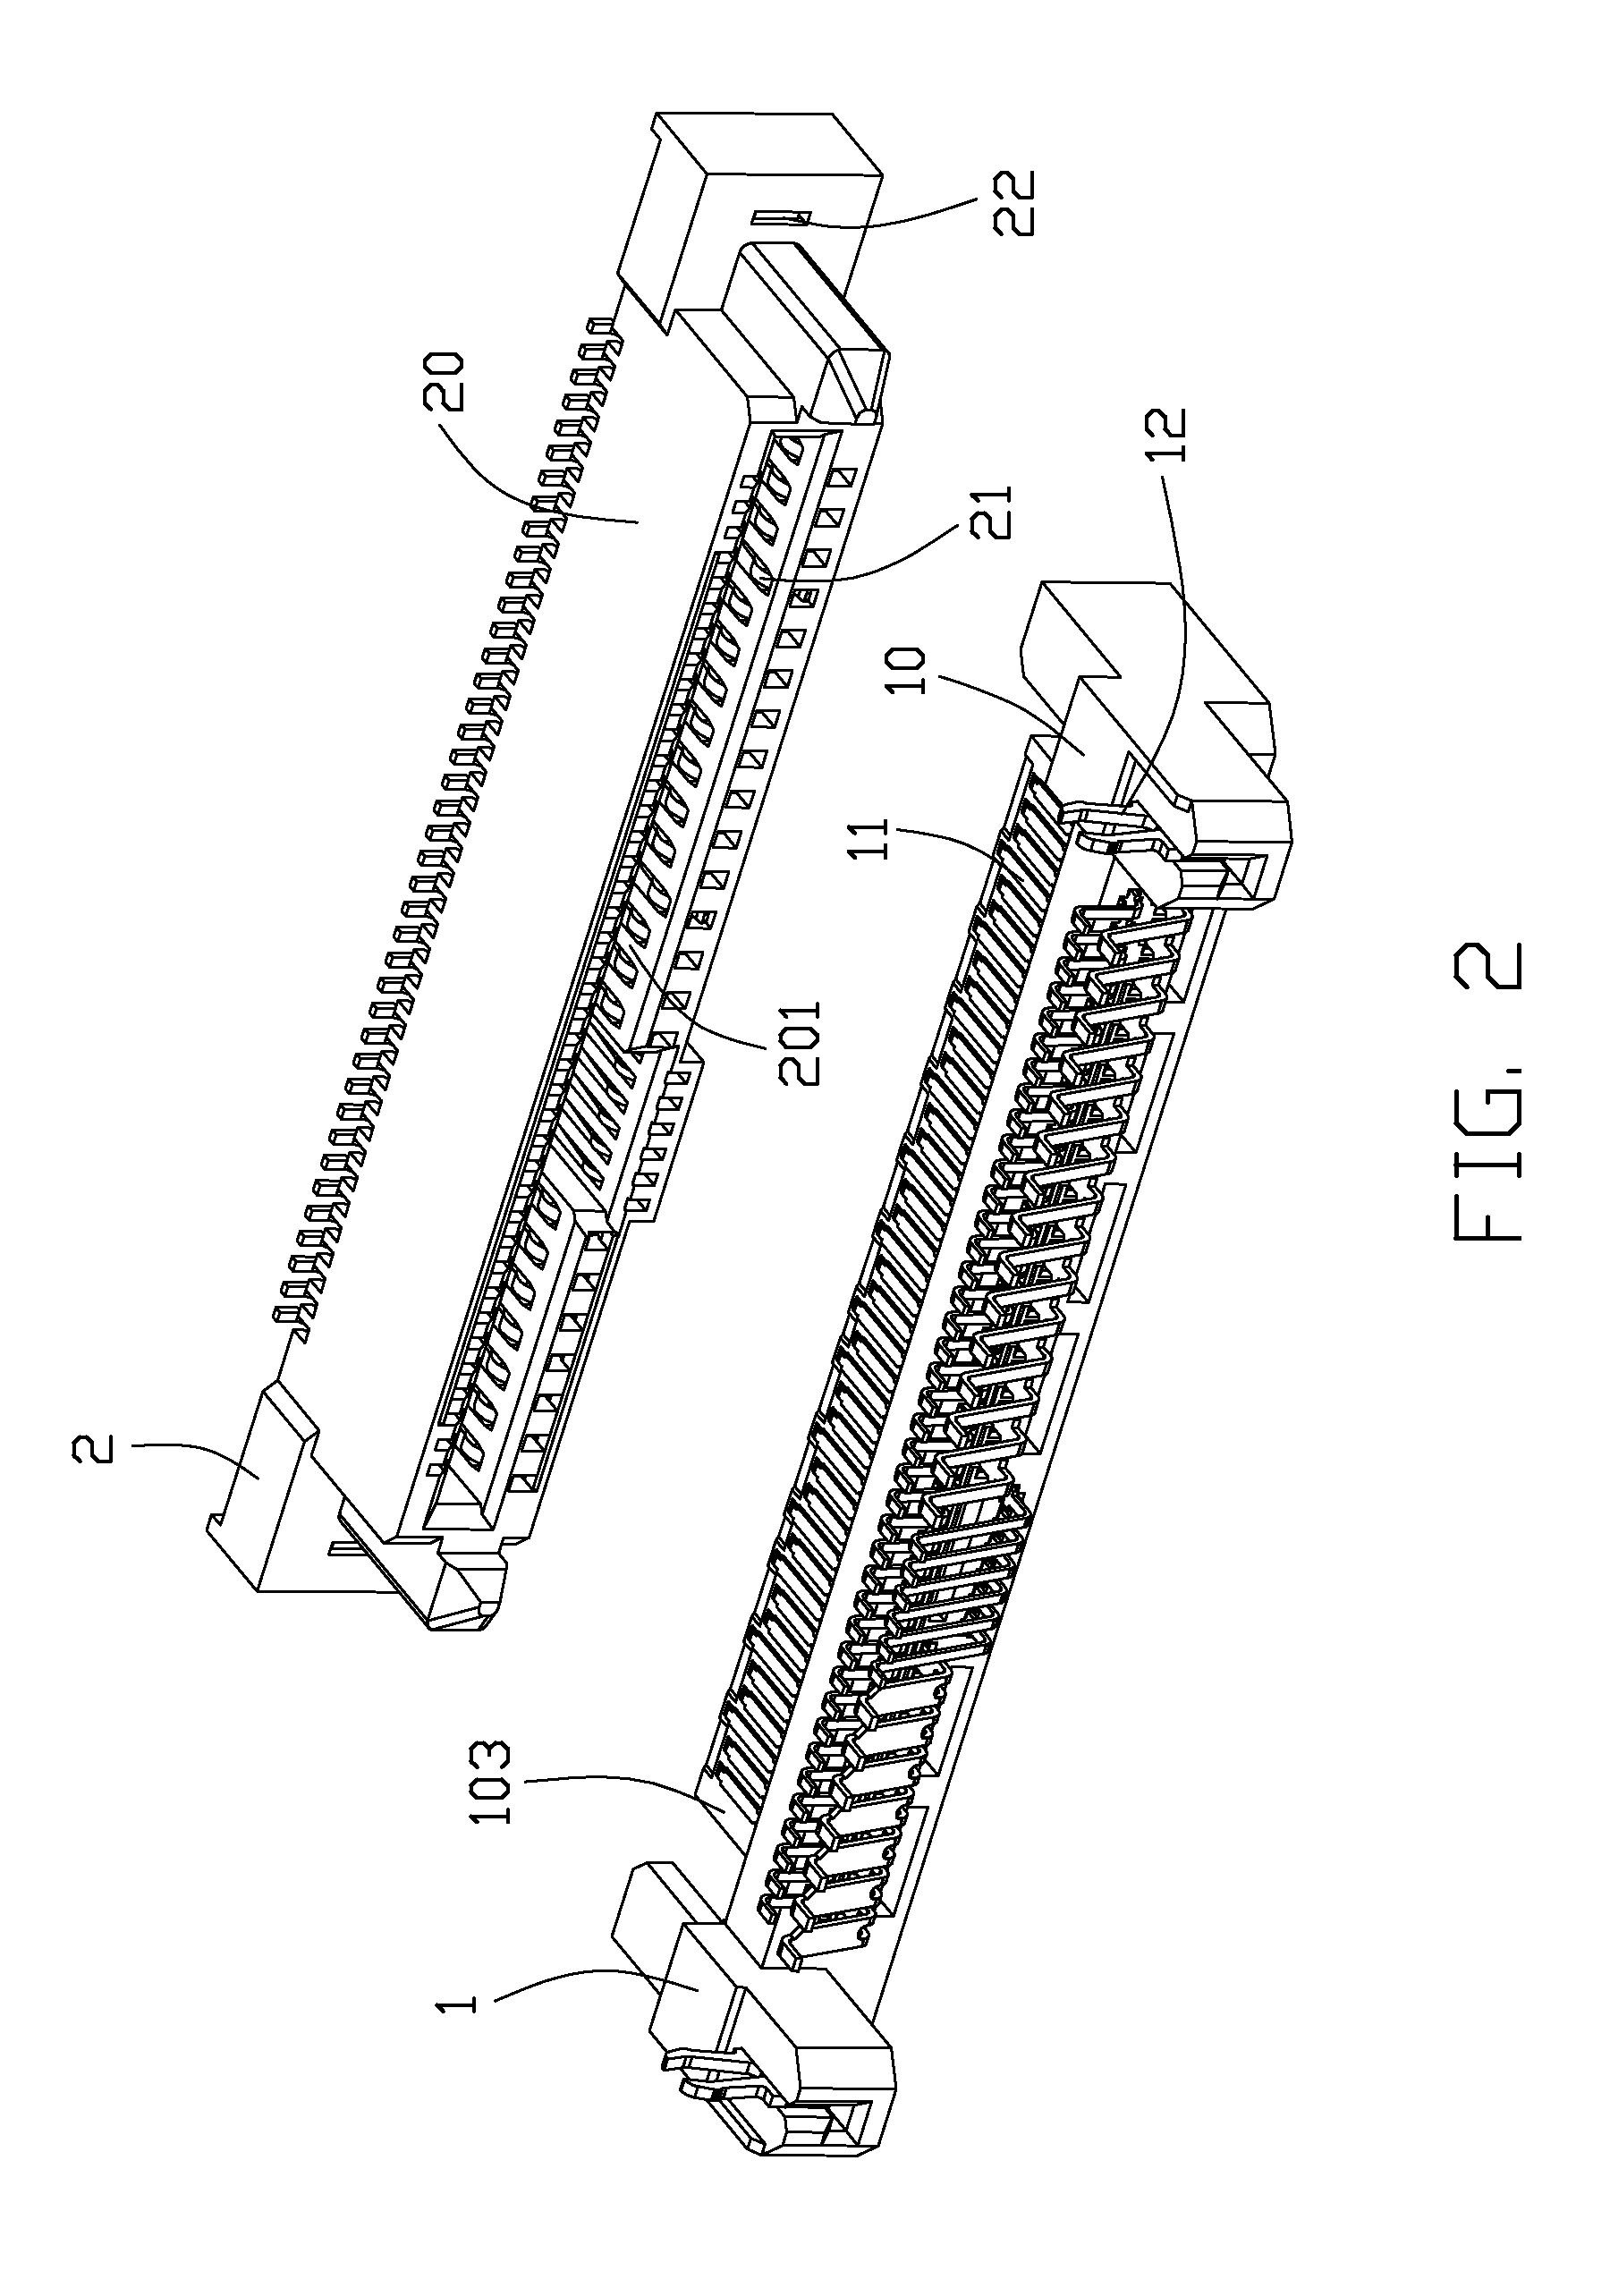 Electrical connector with two grounding bars